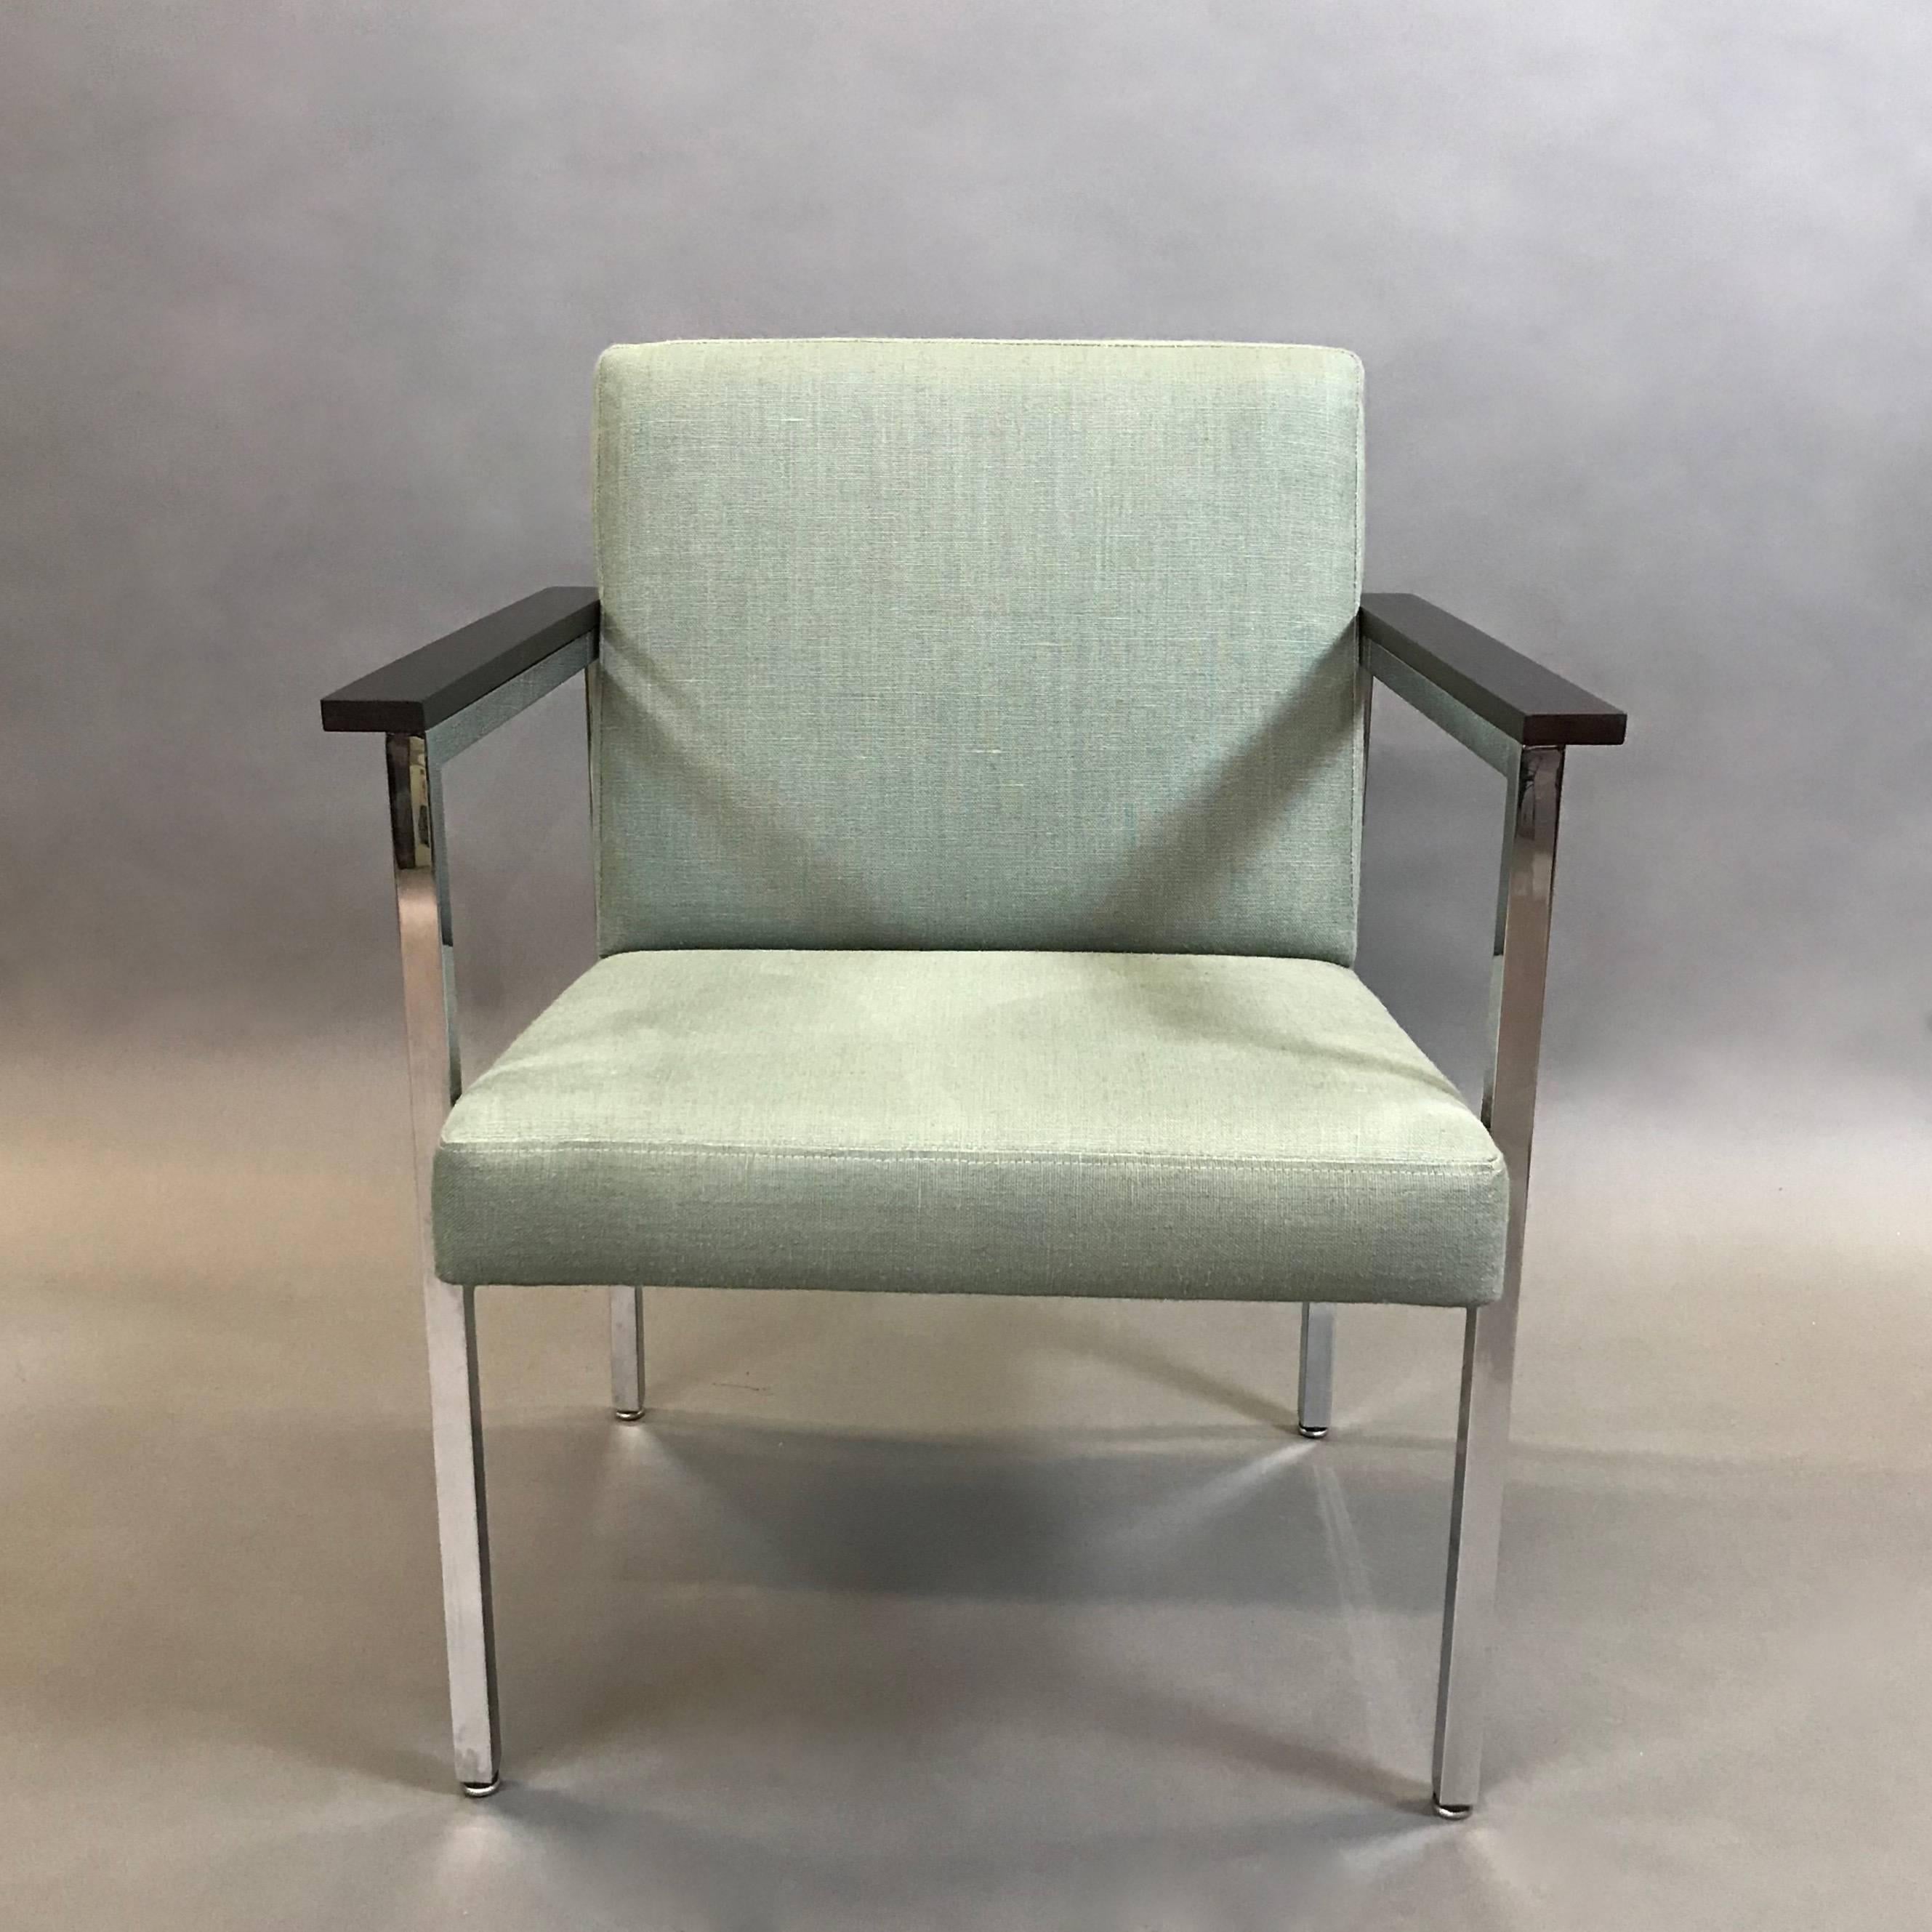 Mid-Century Modern, 1970s, chrome framed armchair features ebonized maple armrests and newly upholstered seat and back in a moss green, cotton linen blend.